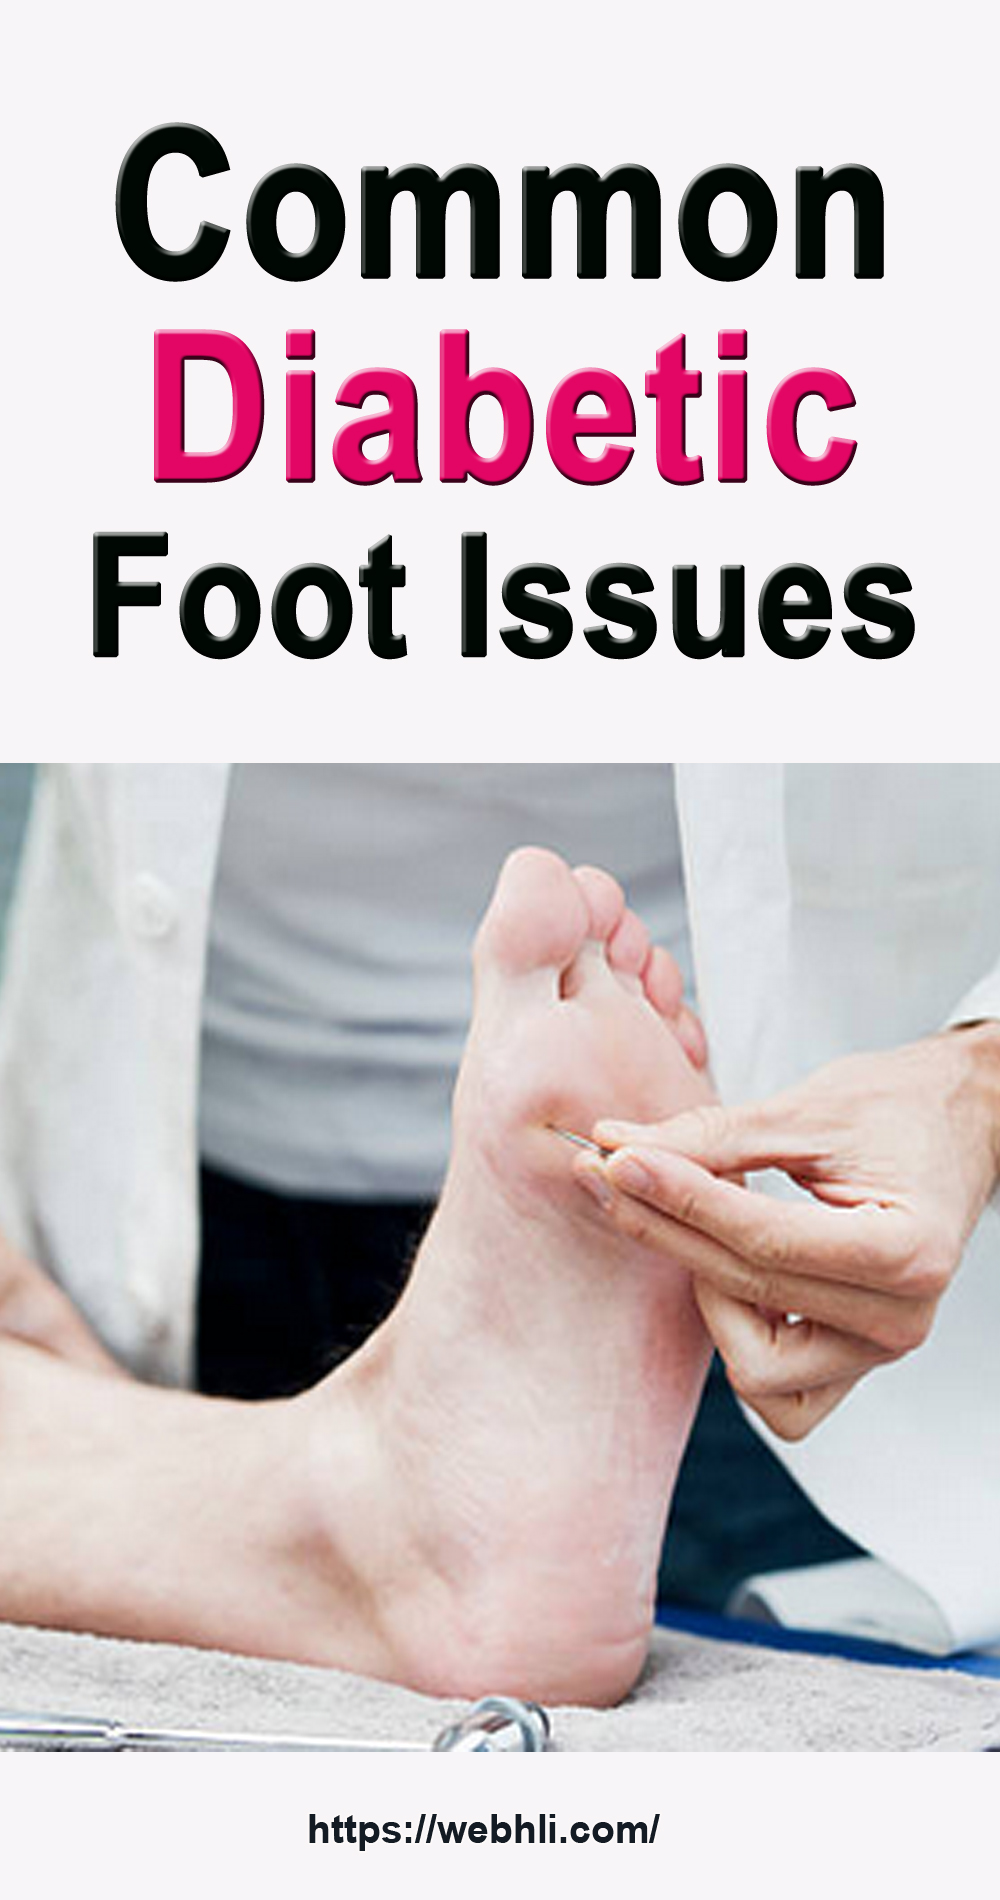 Common Diabetic Foot Issues | Healthy Lifestyle